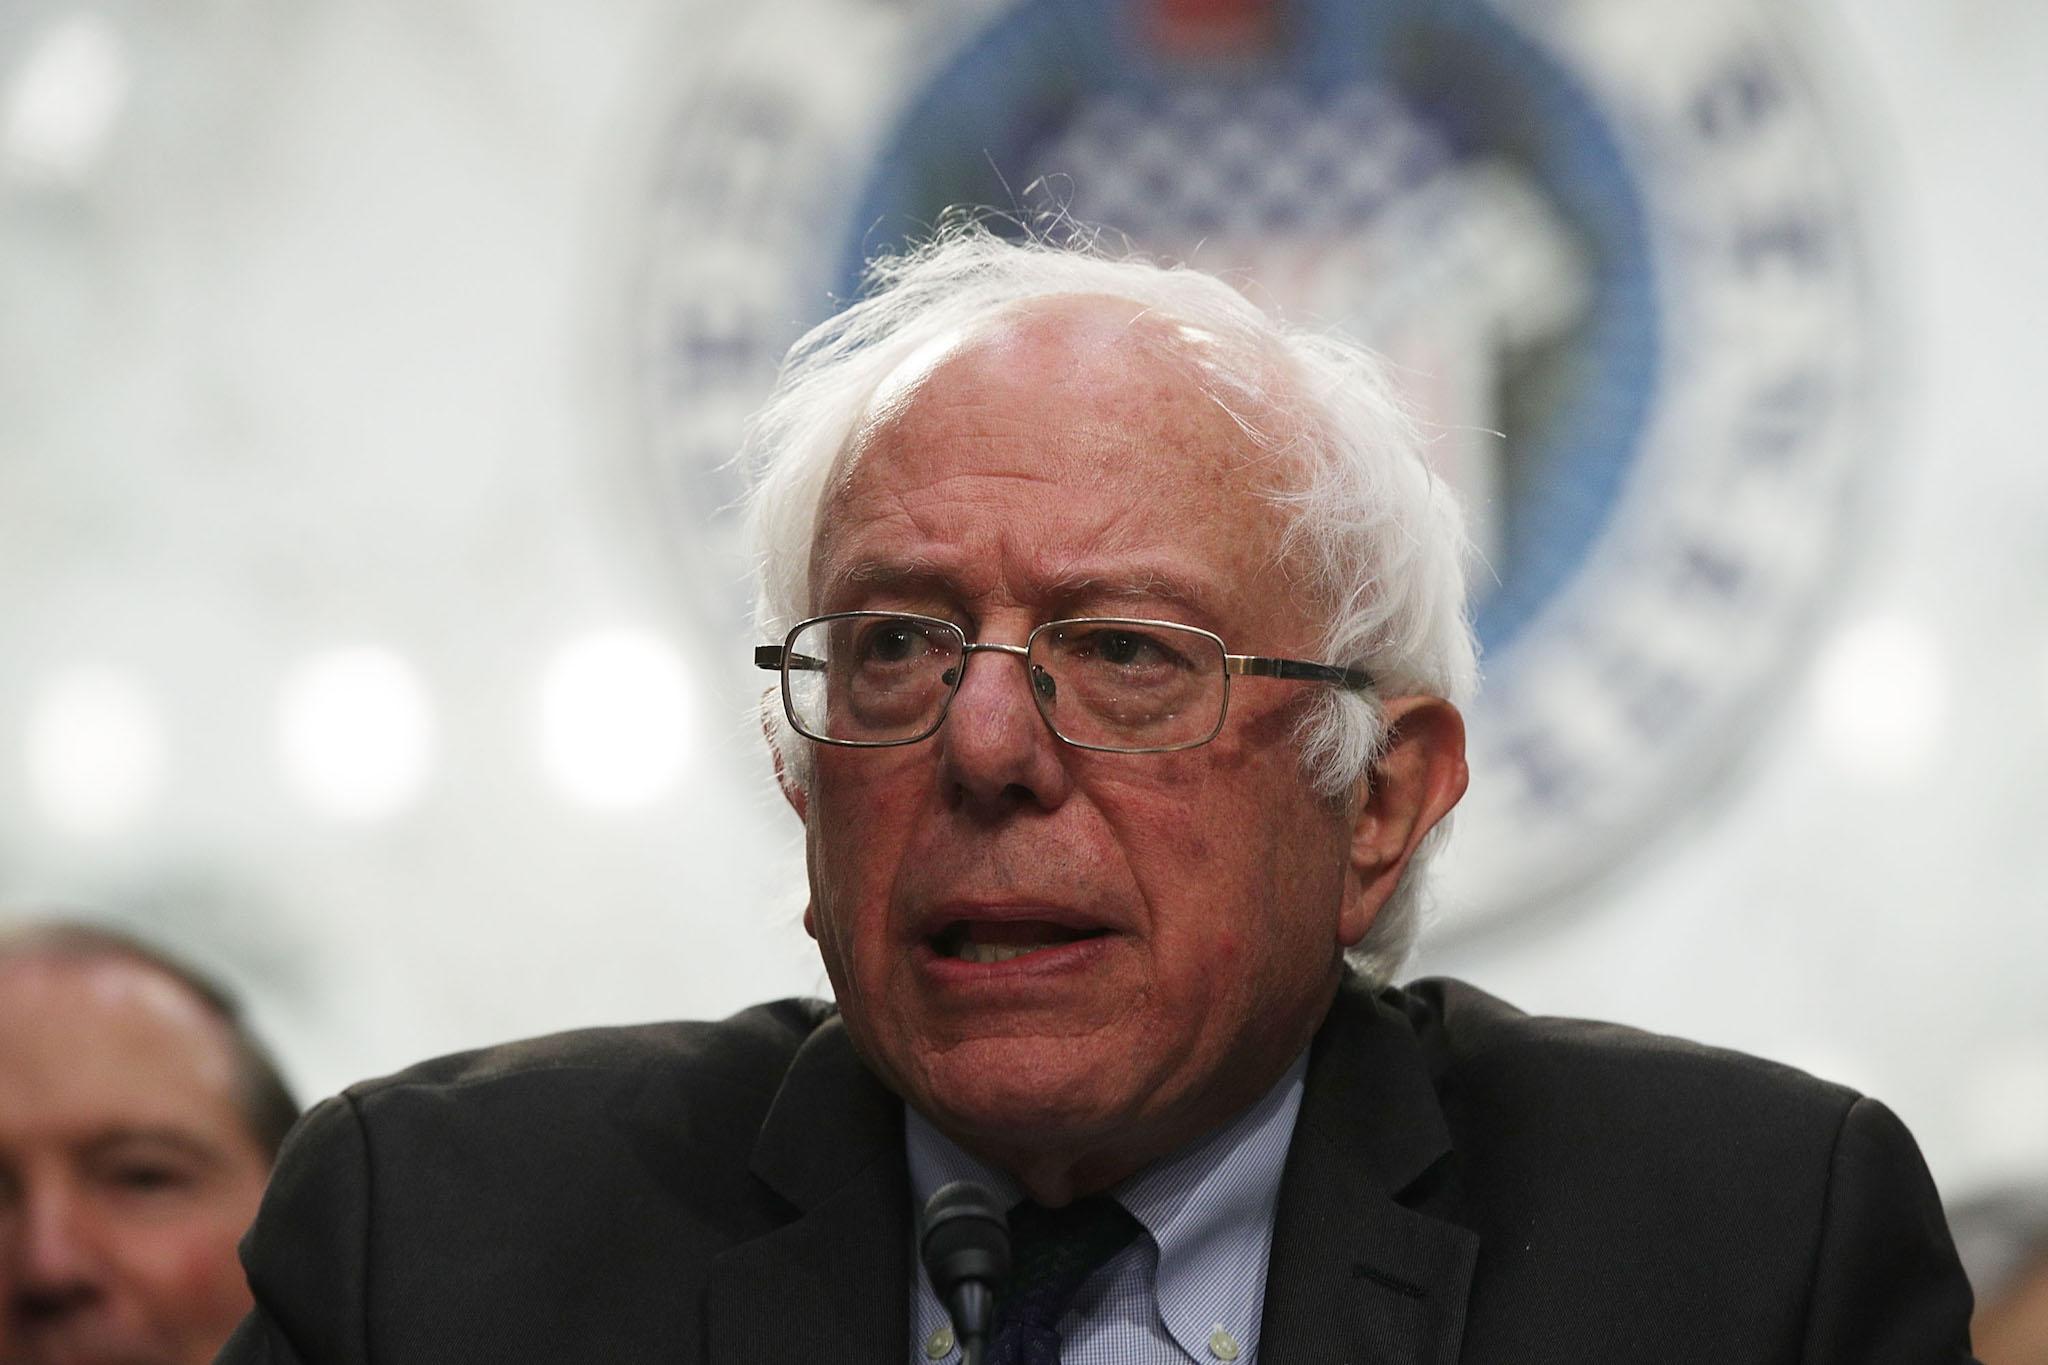 Mr Sanders wants to build a grassroots movement from the ground up